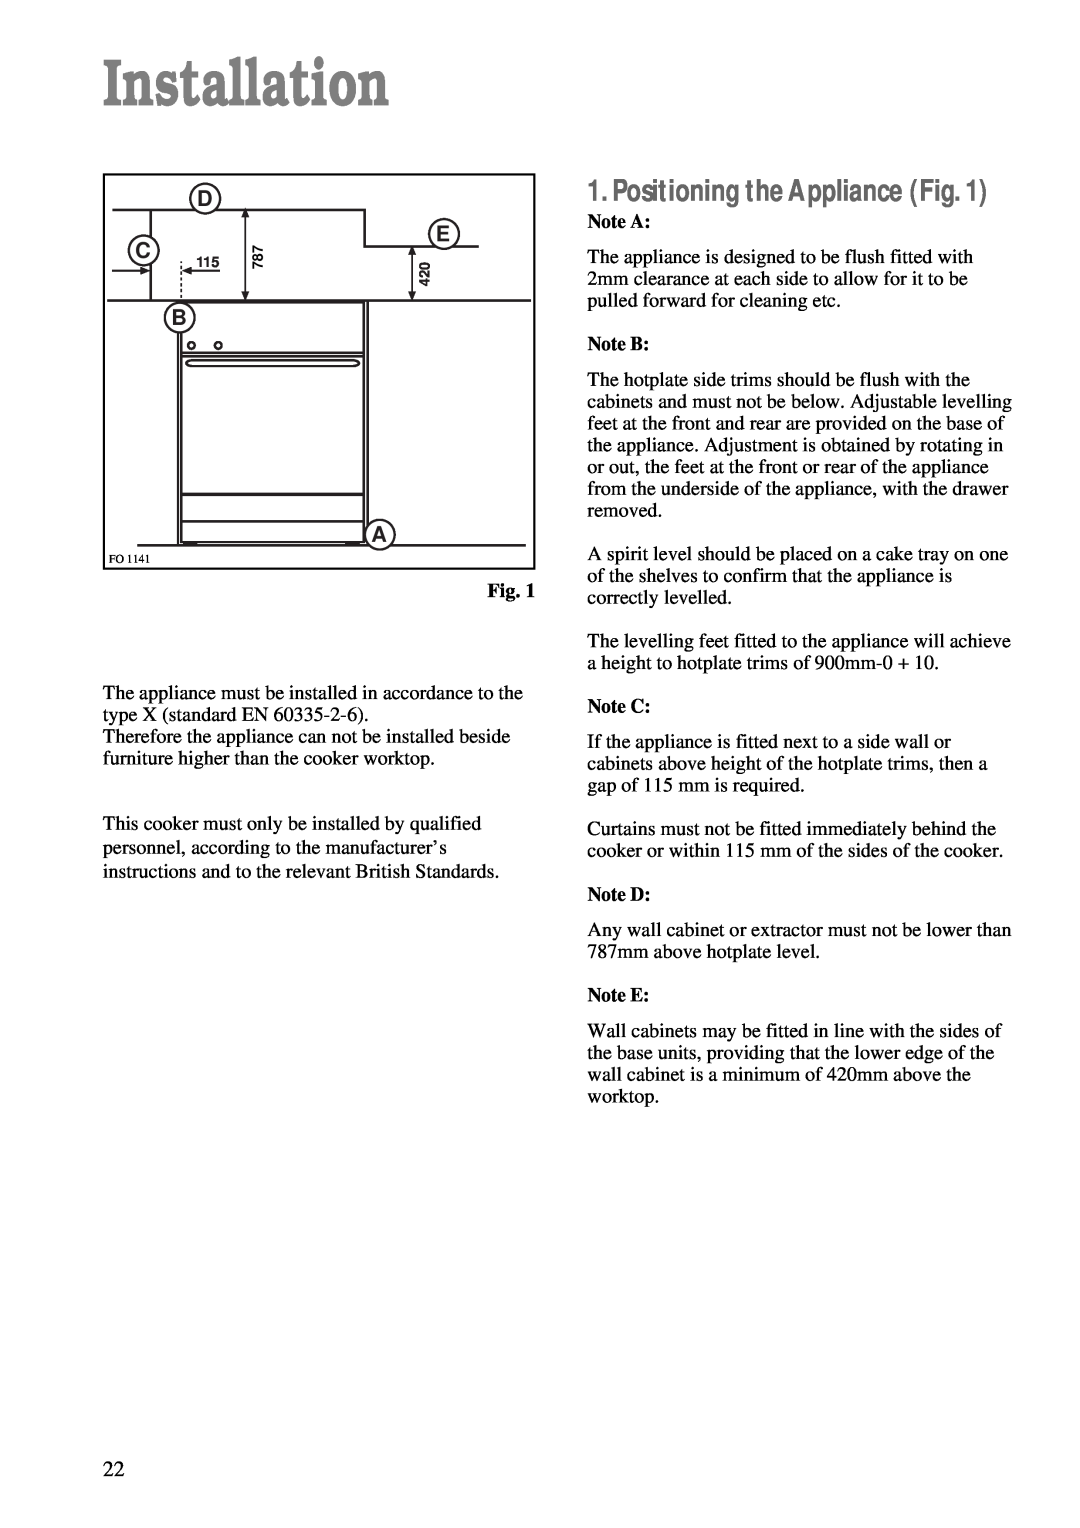 Electrolux CSIG 503 W manual Positioning the Appliance Fig, Note A, Note B, Note C, Note D, Note E, Installation 